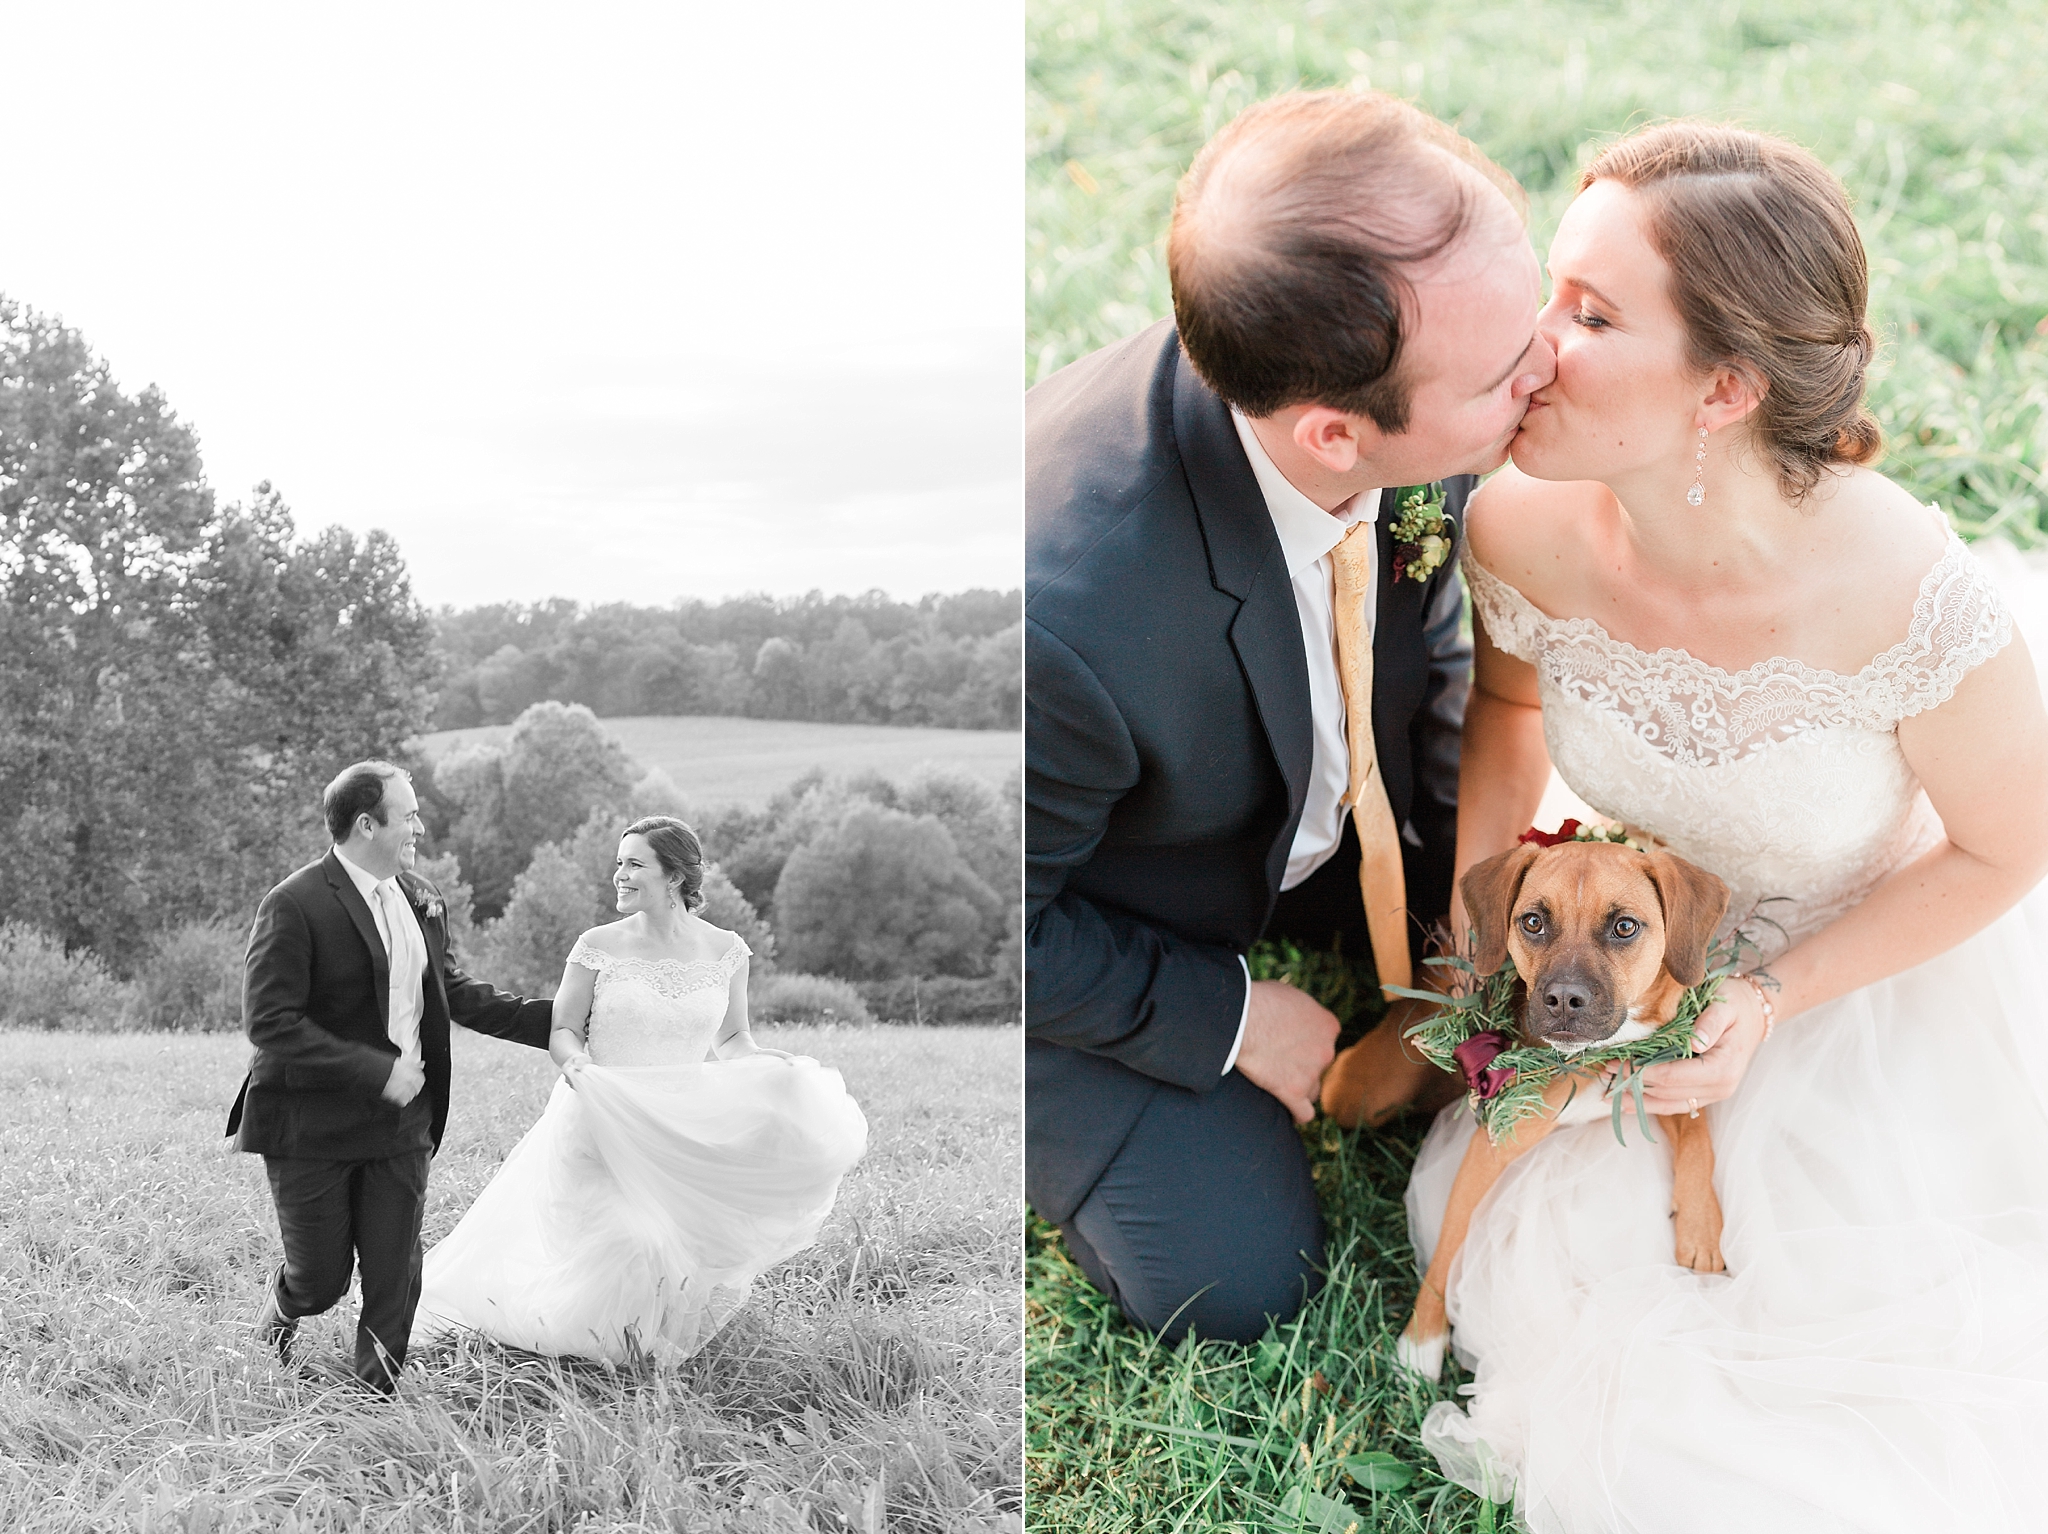 This classic fall wedding at Rixey Manor in Rixeyville, VA features a color palette of navy and gold with pops of plum!